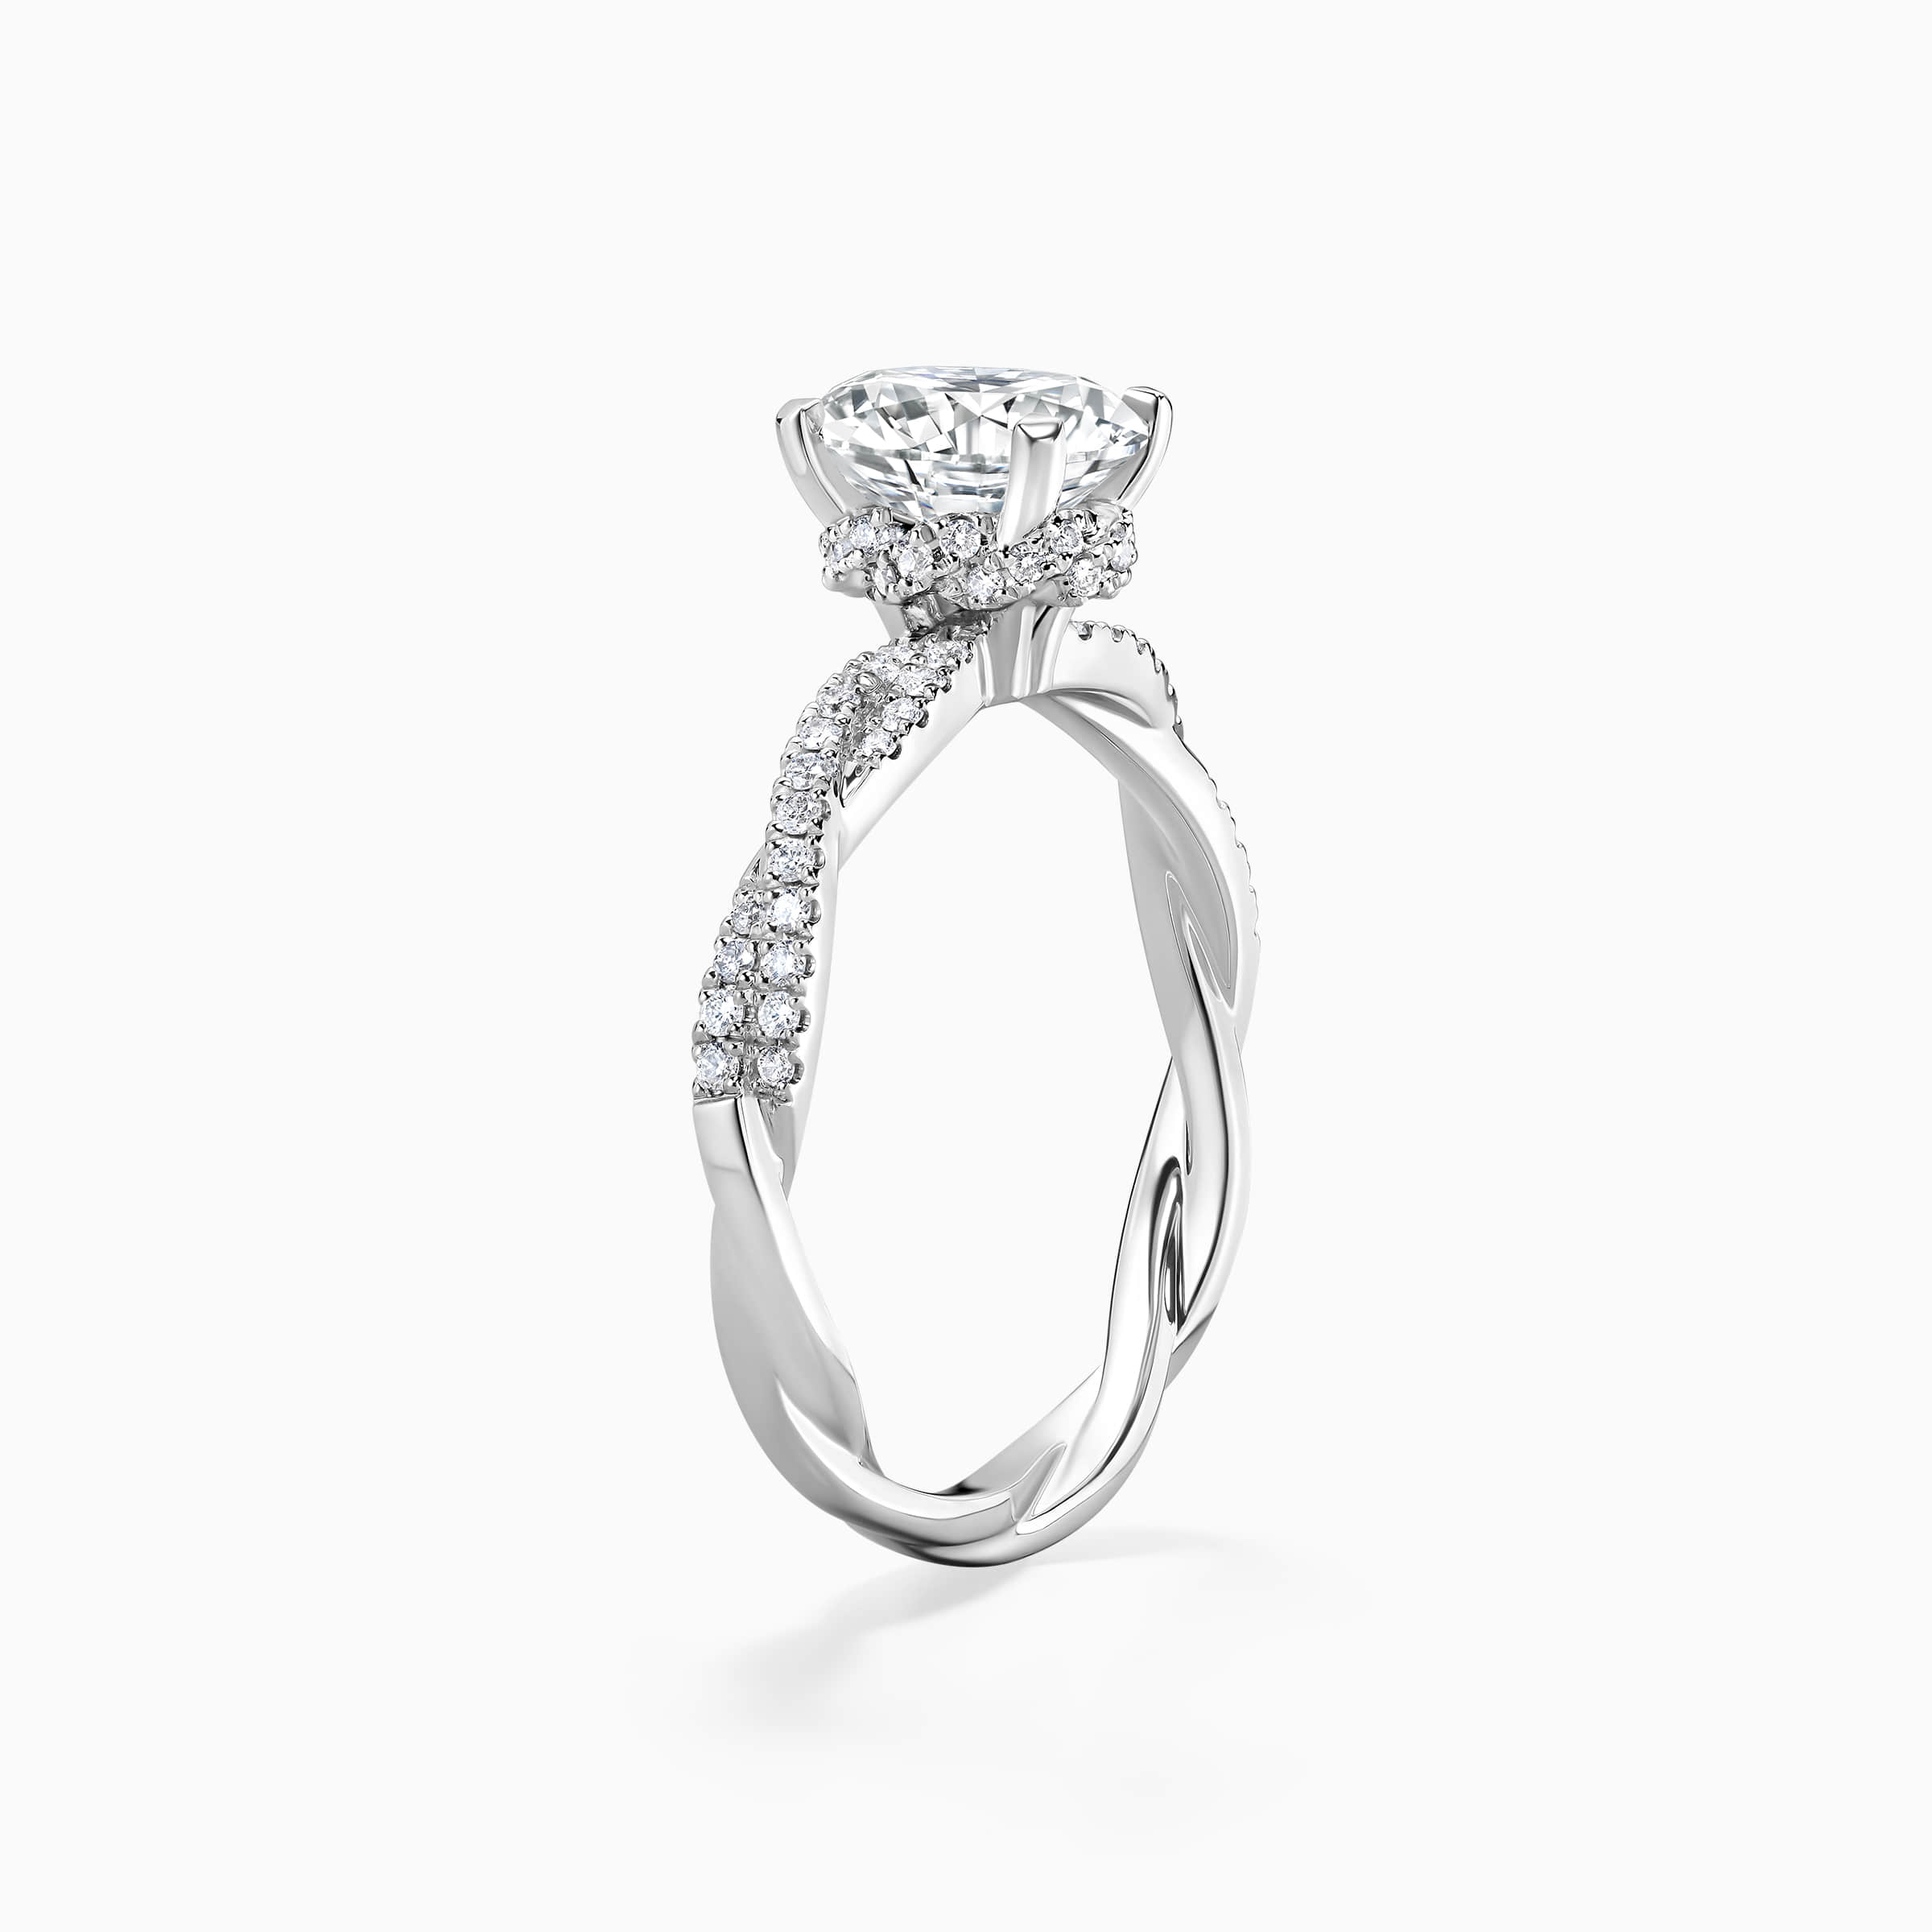 Darry Ring oval diamond engagement ring side view